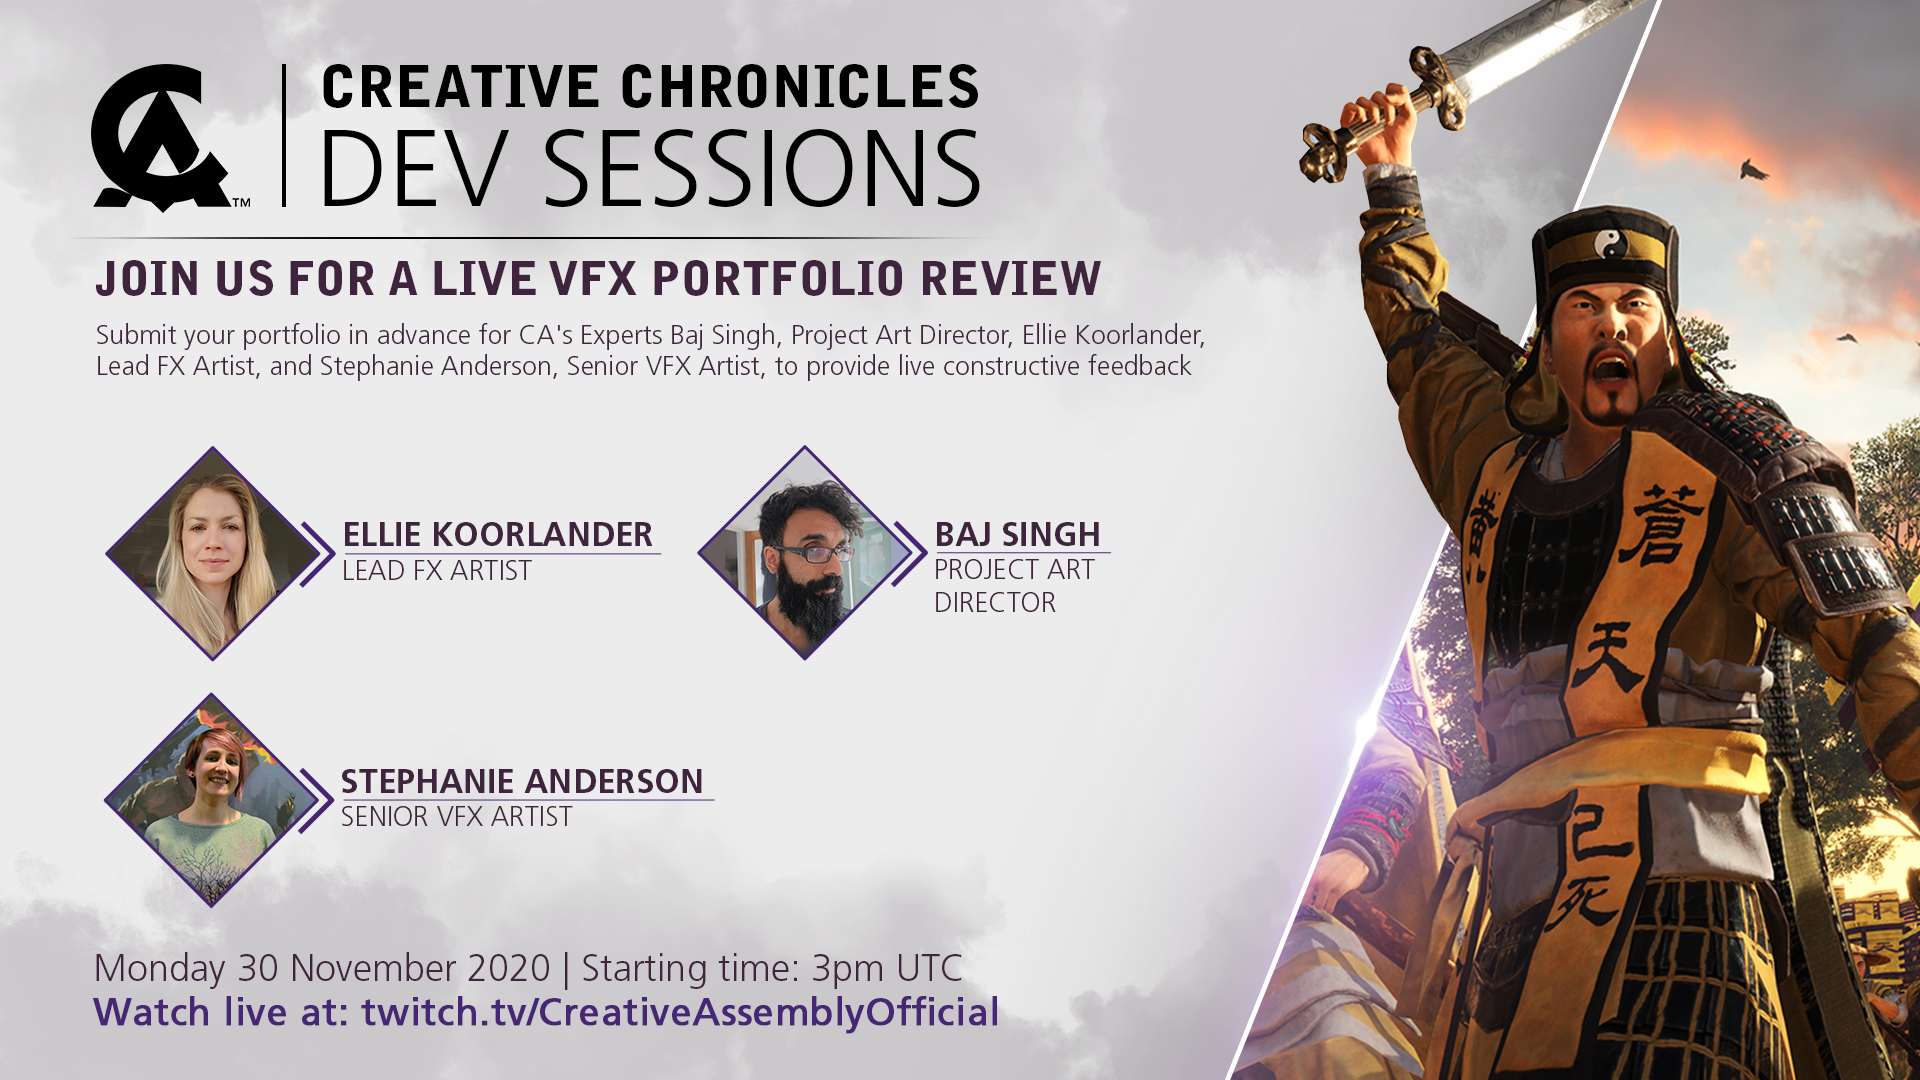 Creative Assembly We Are Back With Another Portfolio Review Join Ca S Lead Fx Artist Senior Vfx Artist And Project Art Director For A Livestreamed Vfx Portfolio Review On Monday 30